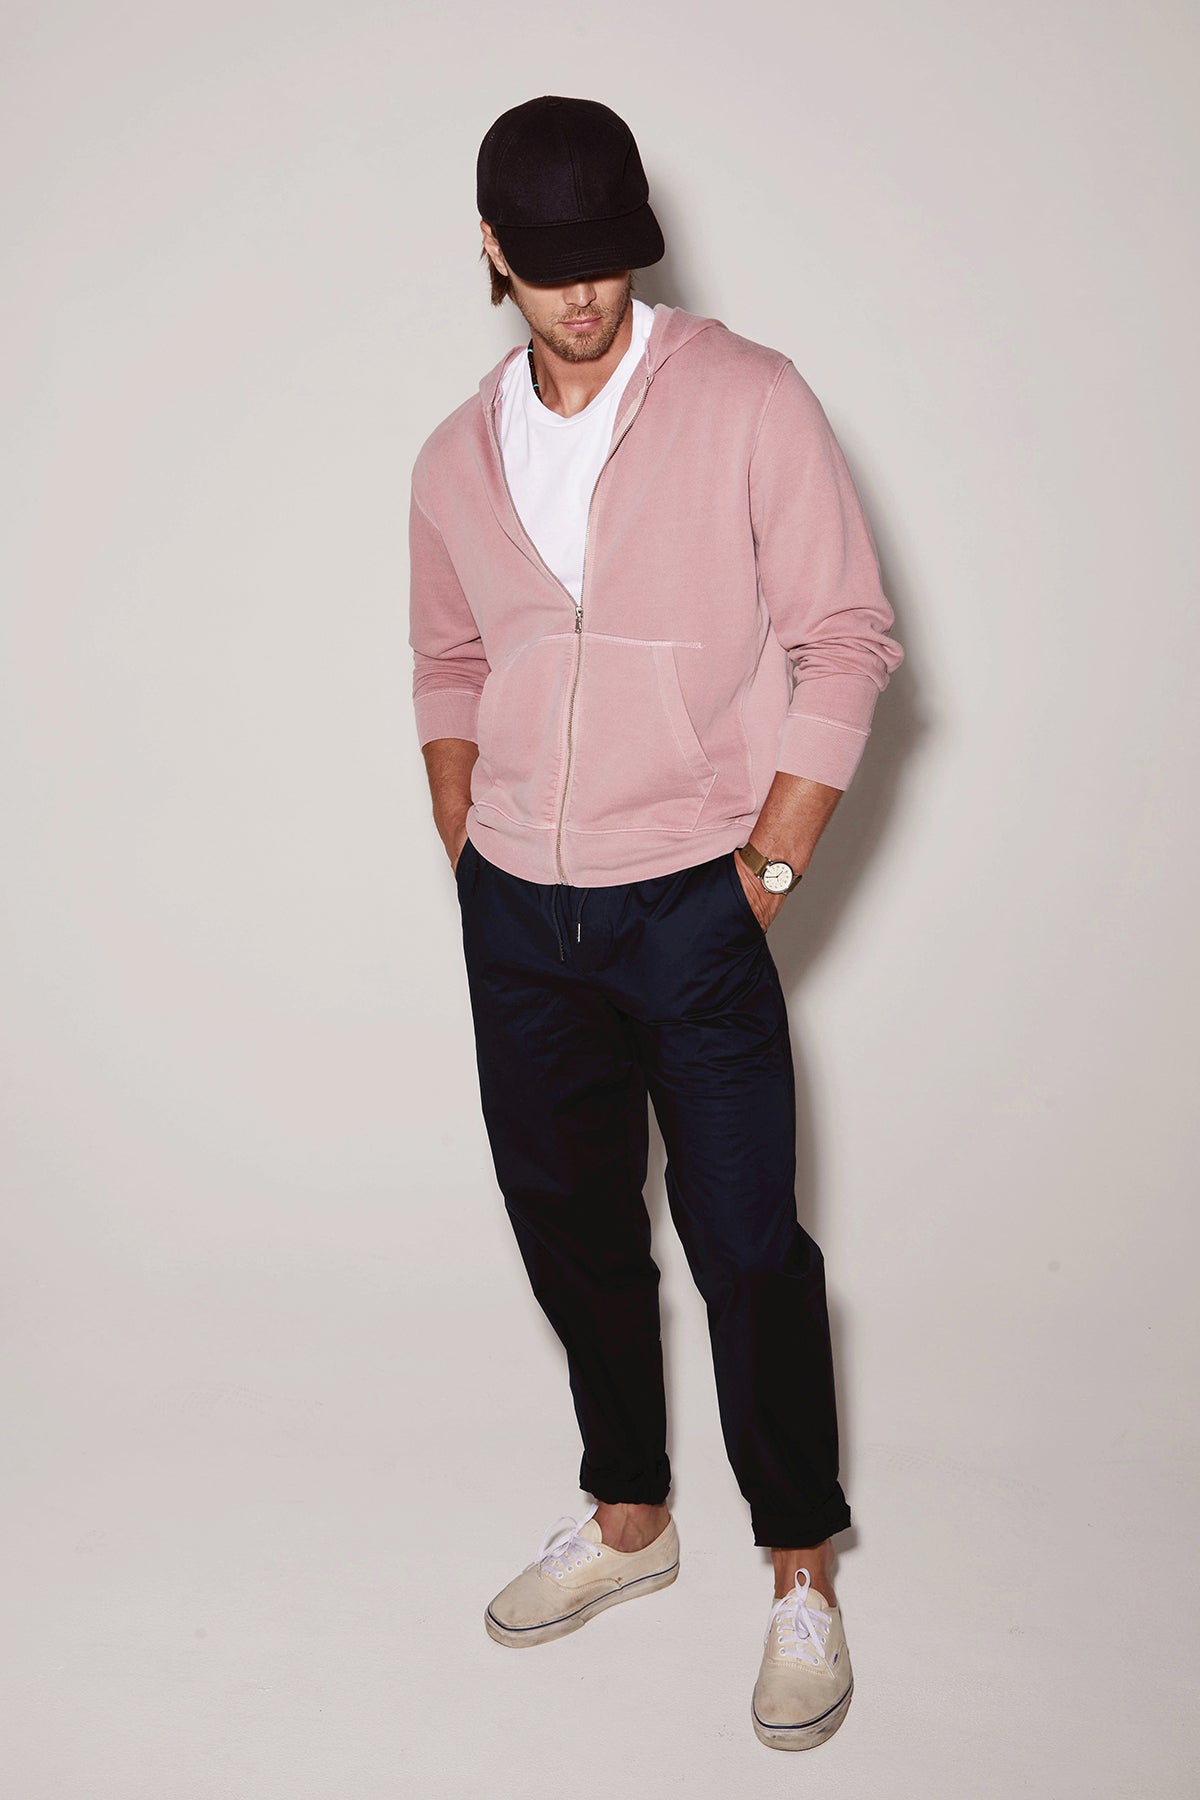 A man in a pink hoodie, white t-shirt, and navy trousers, wearing a black cap and white sneakers, poses against a light background wearing the Velvet by Graham & Spencer LAZARUS JOGGER.-36732528787649